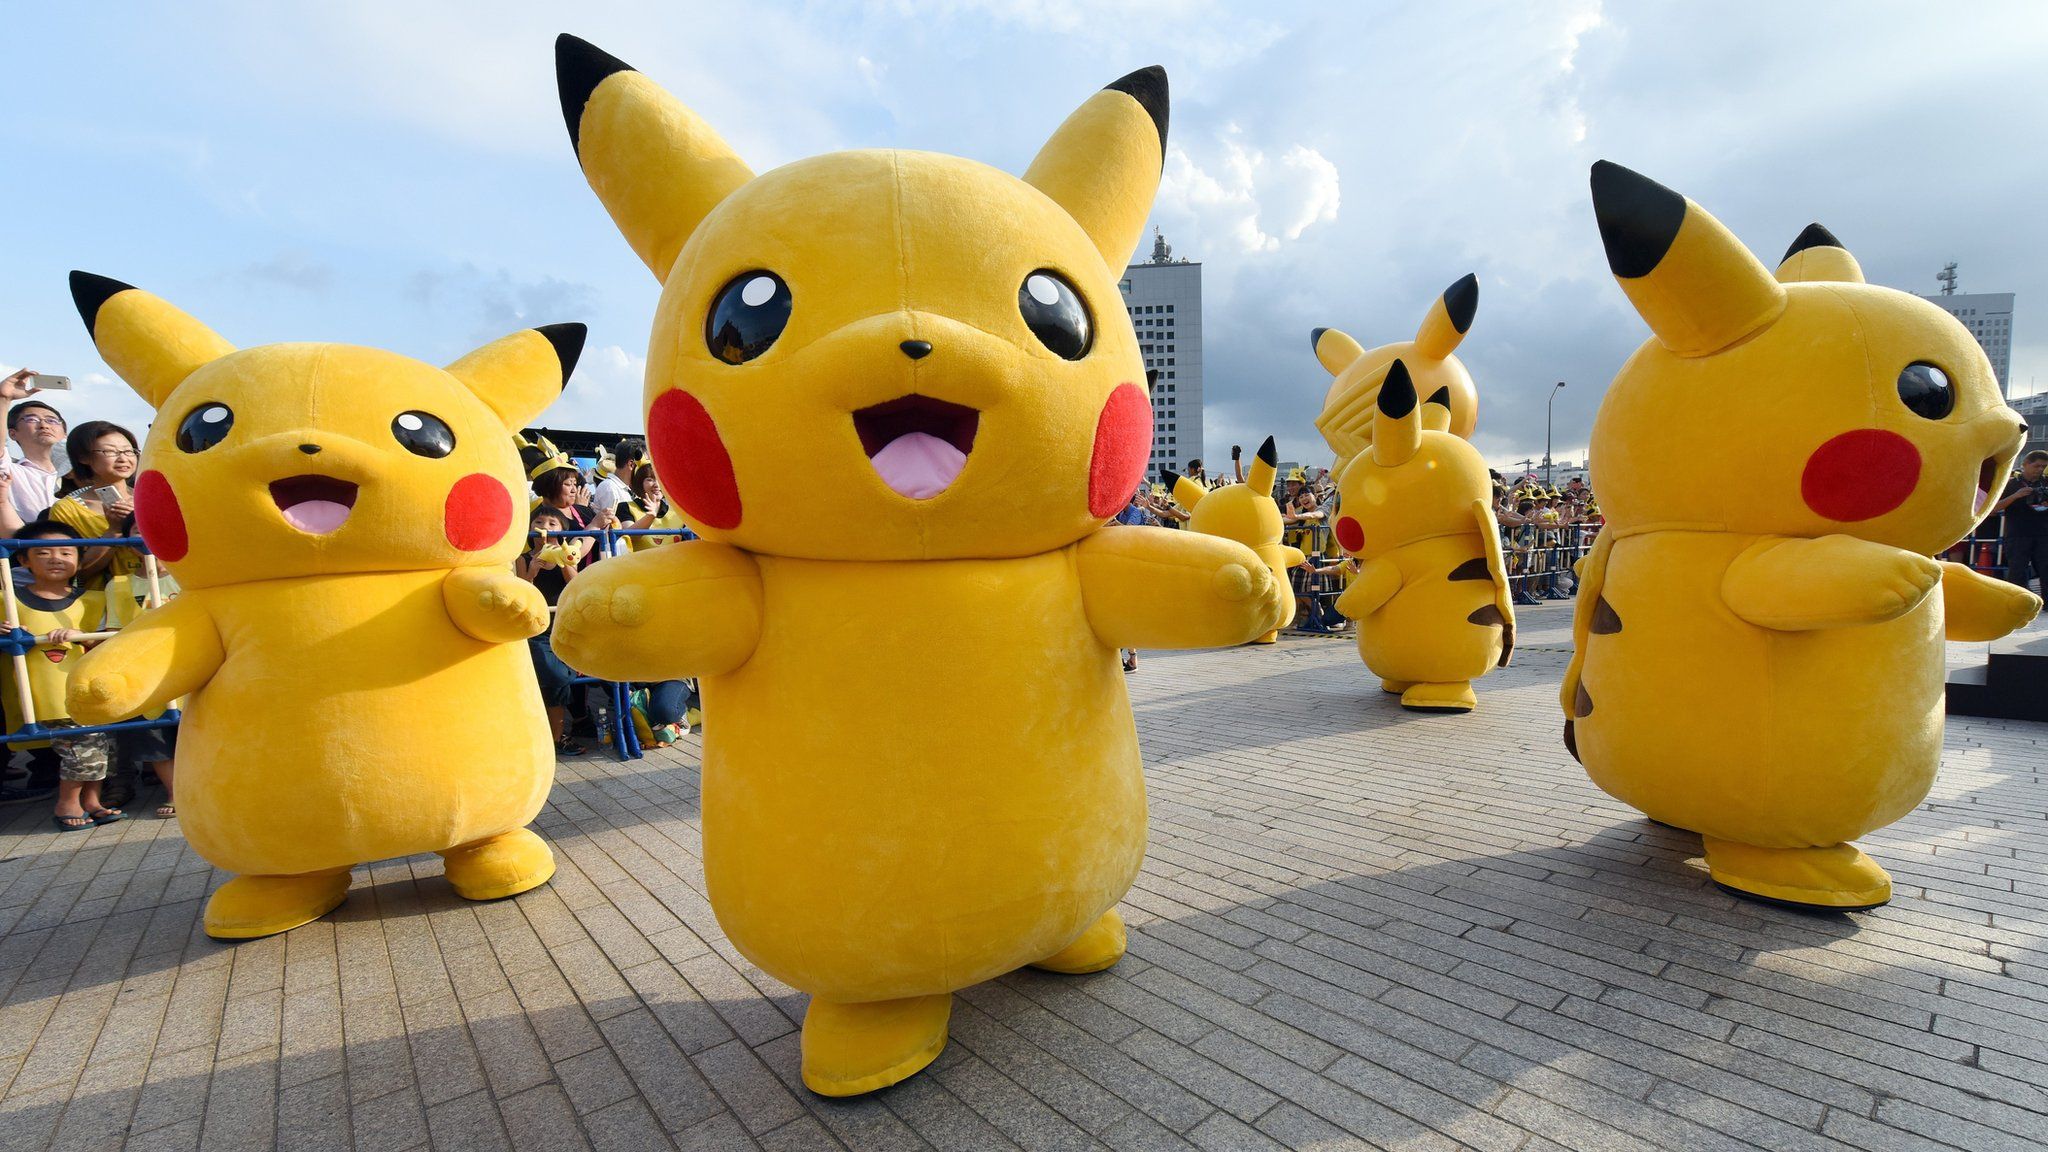 Dozens of people dressed up as Pikachu, the famous character of Nintendo's videogame software Pokemon